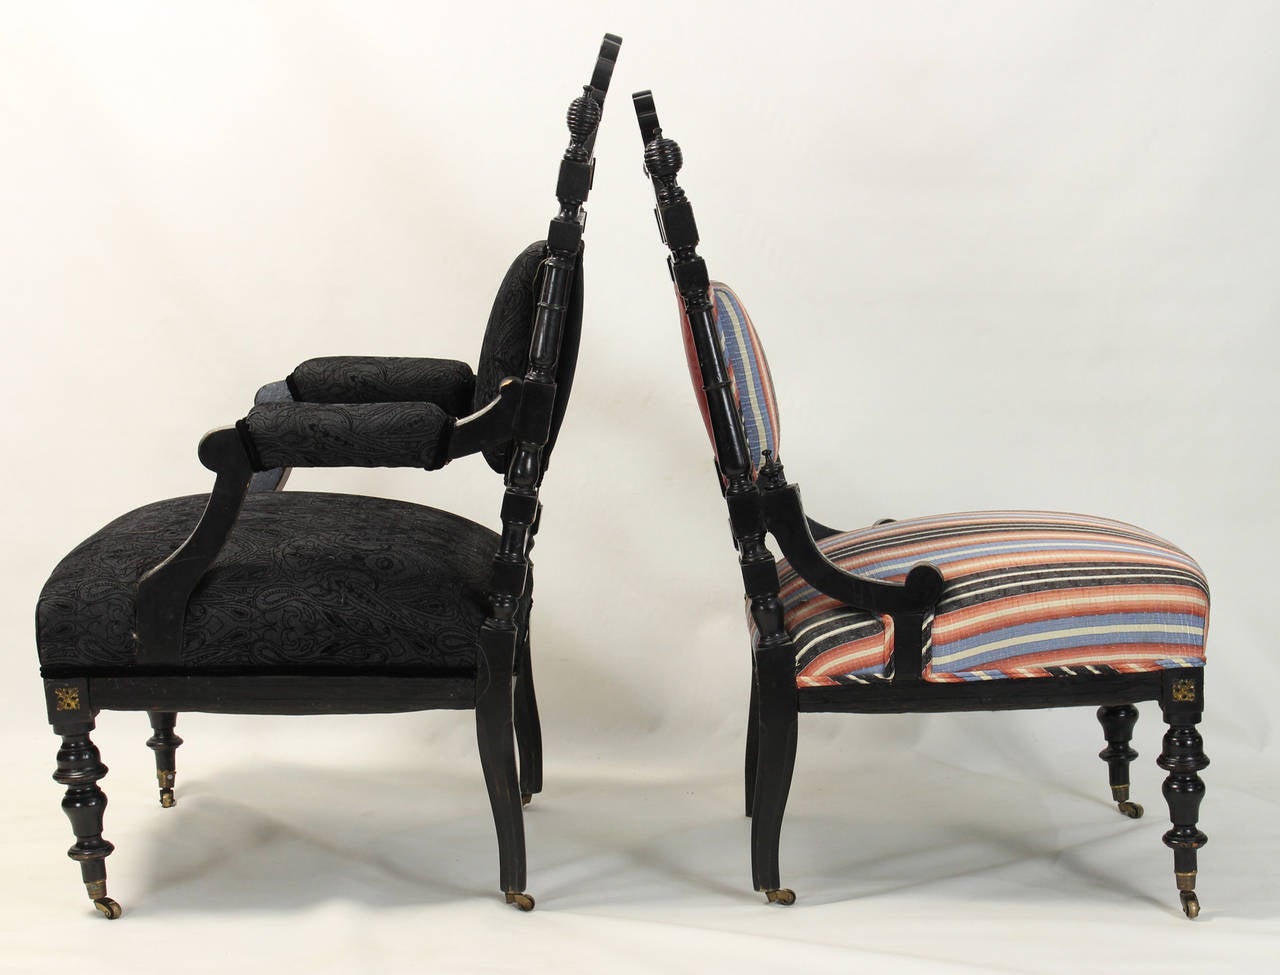 An unusual pair of English Victorian Parlor chairs dating from the 1870s in black lacquer accented with extensive mother-of-pearl decoration.